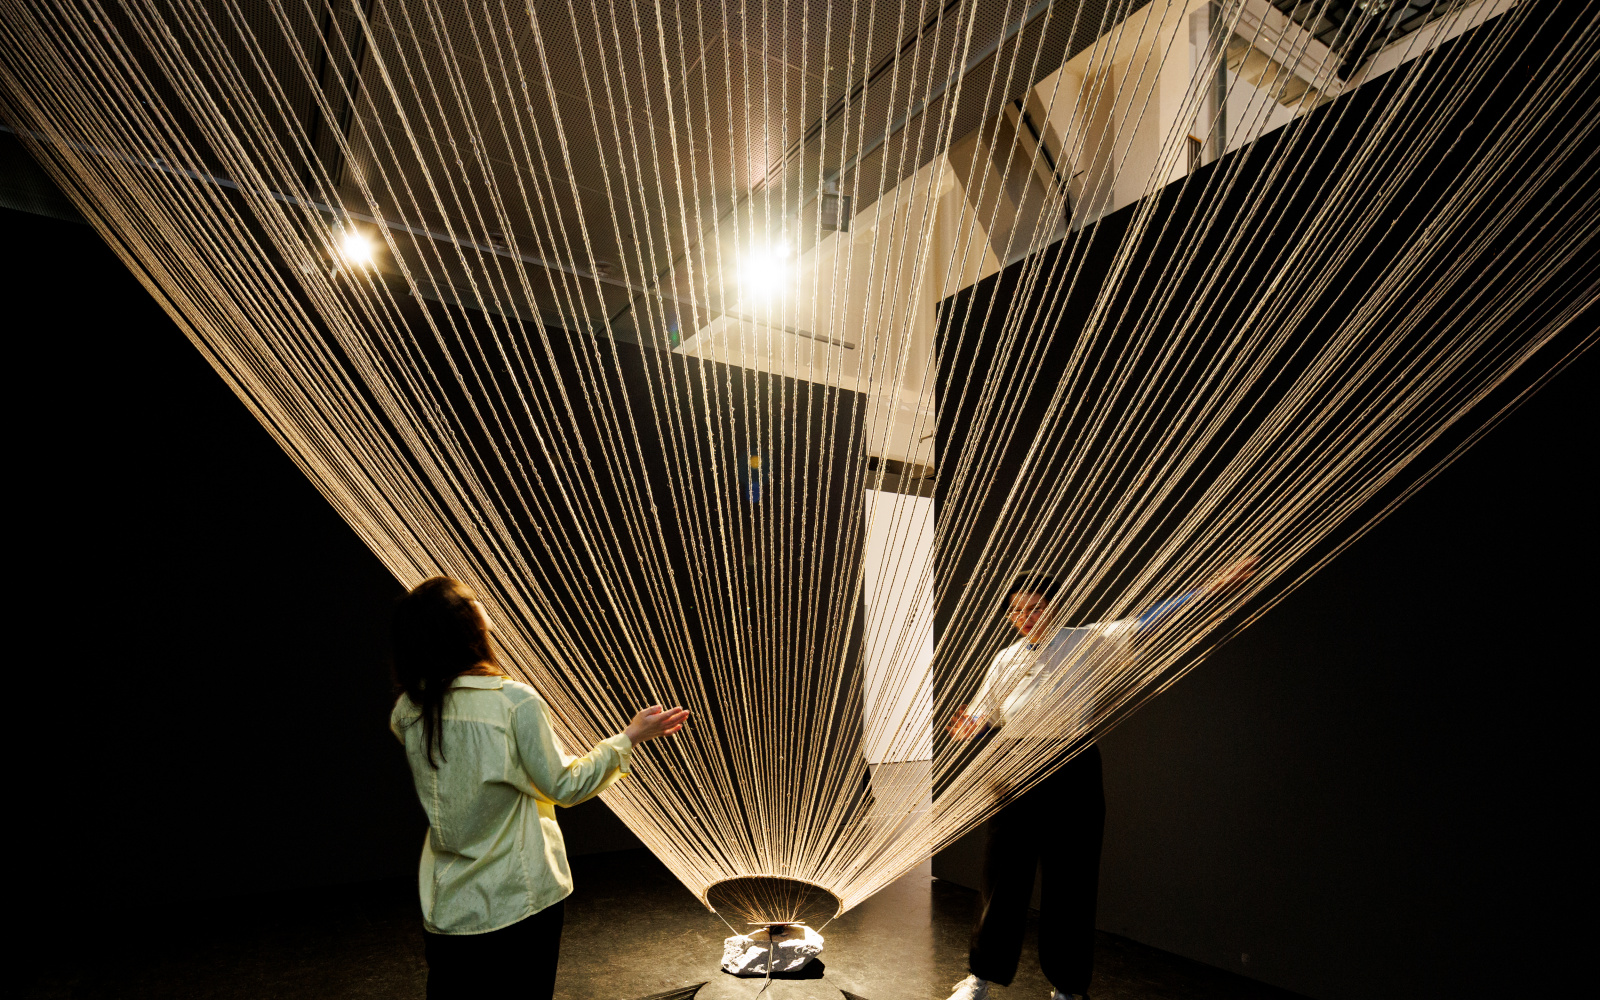 You can see a ceiling-high, wide net made of ropes. Two people are standing next to it, one on the left and one on the right.